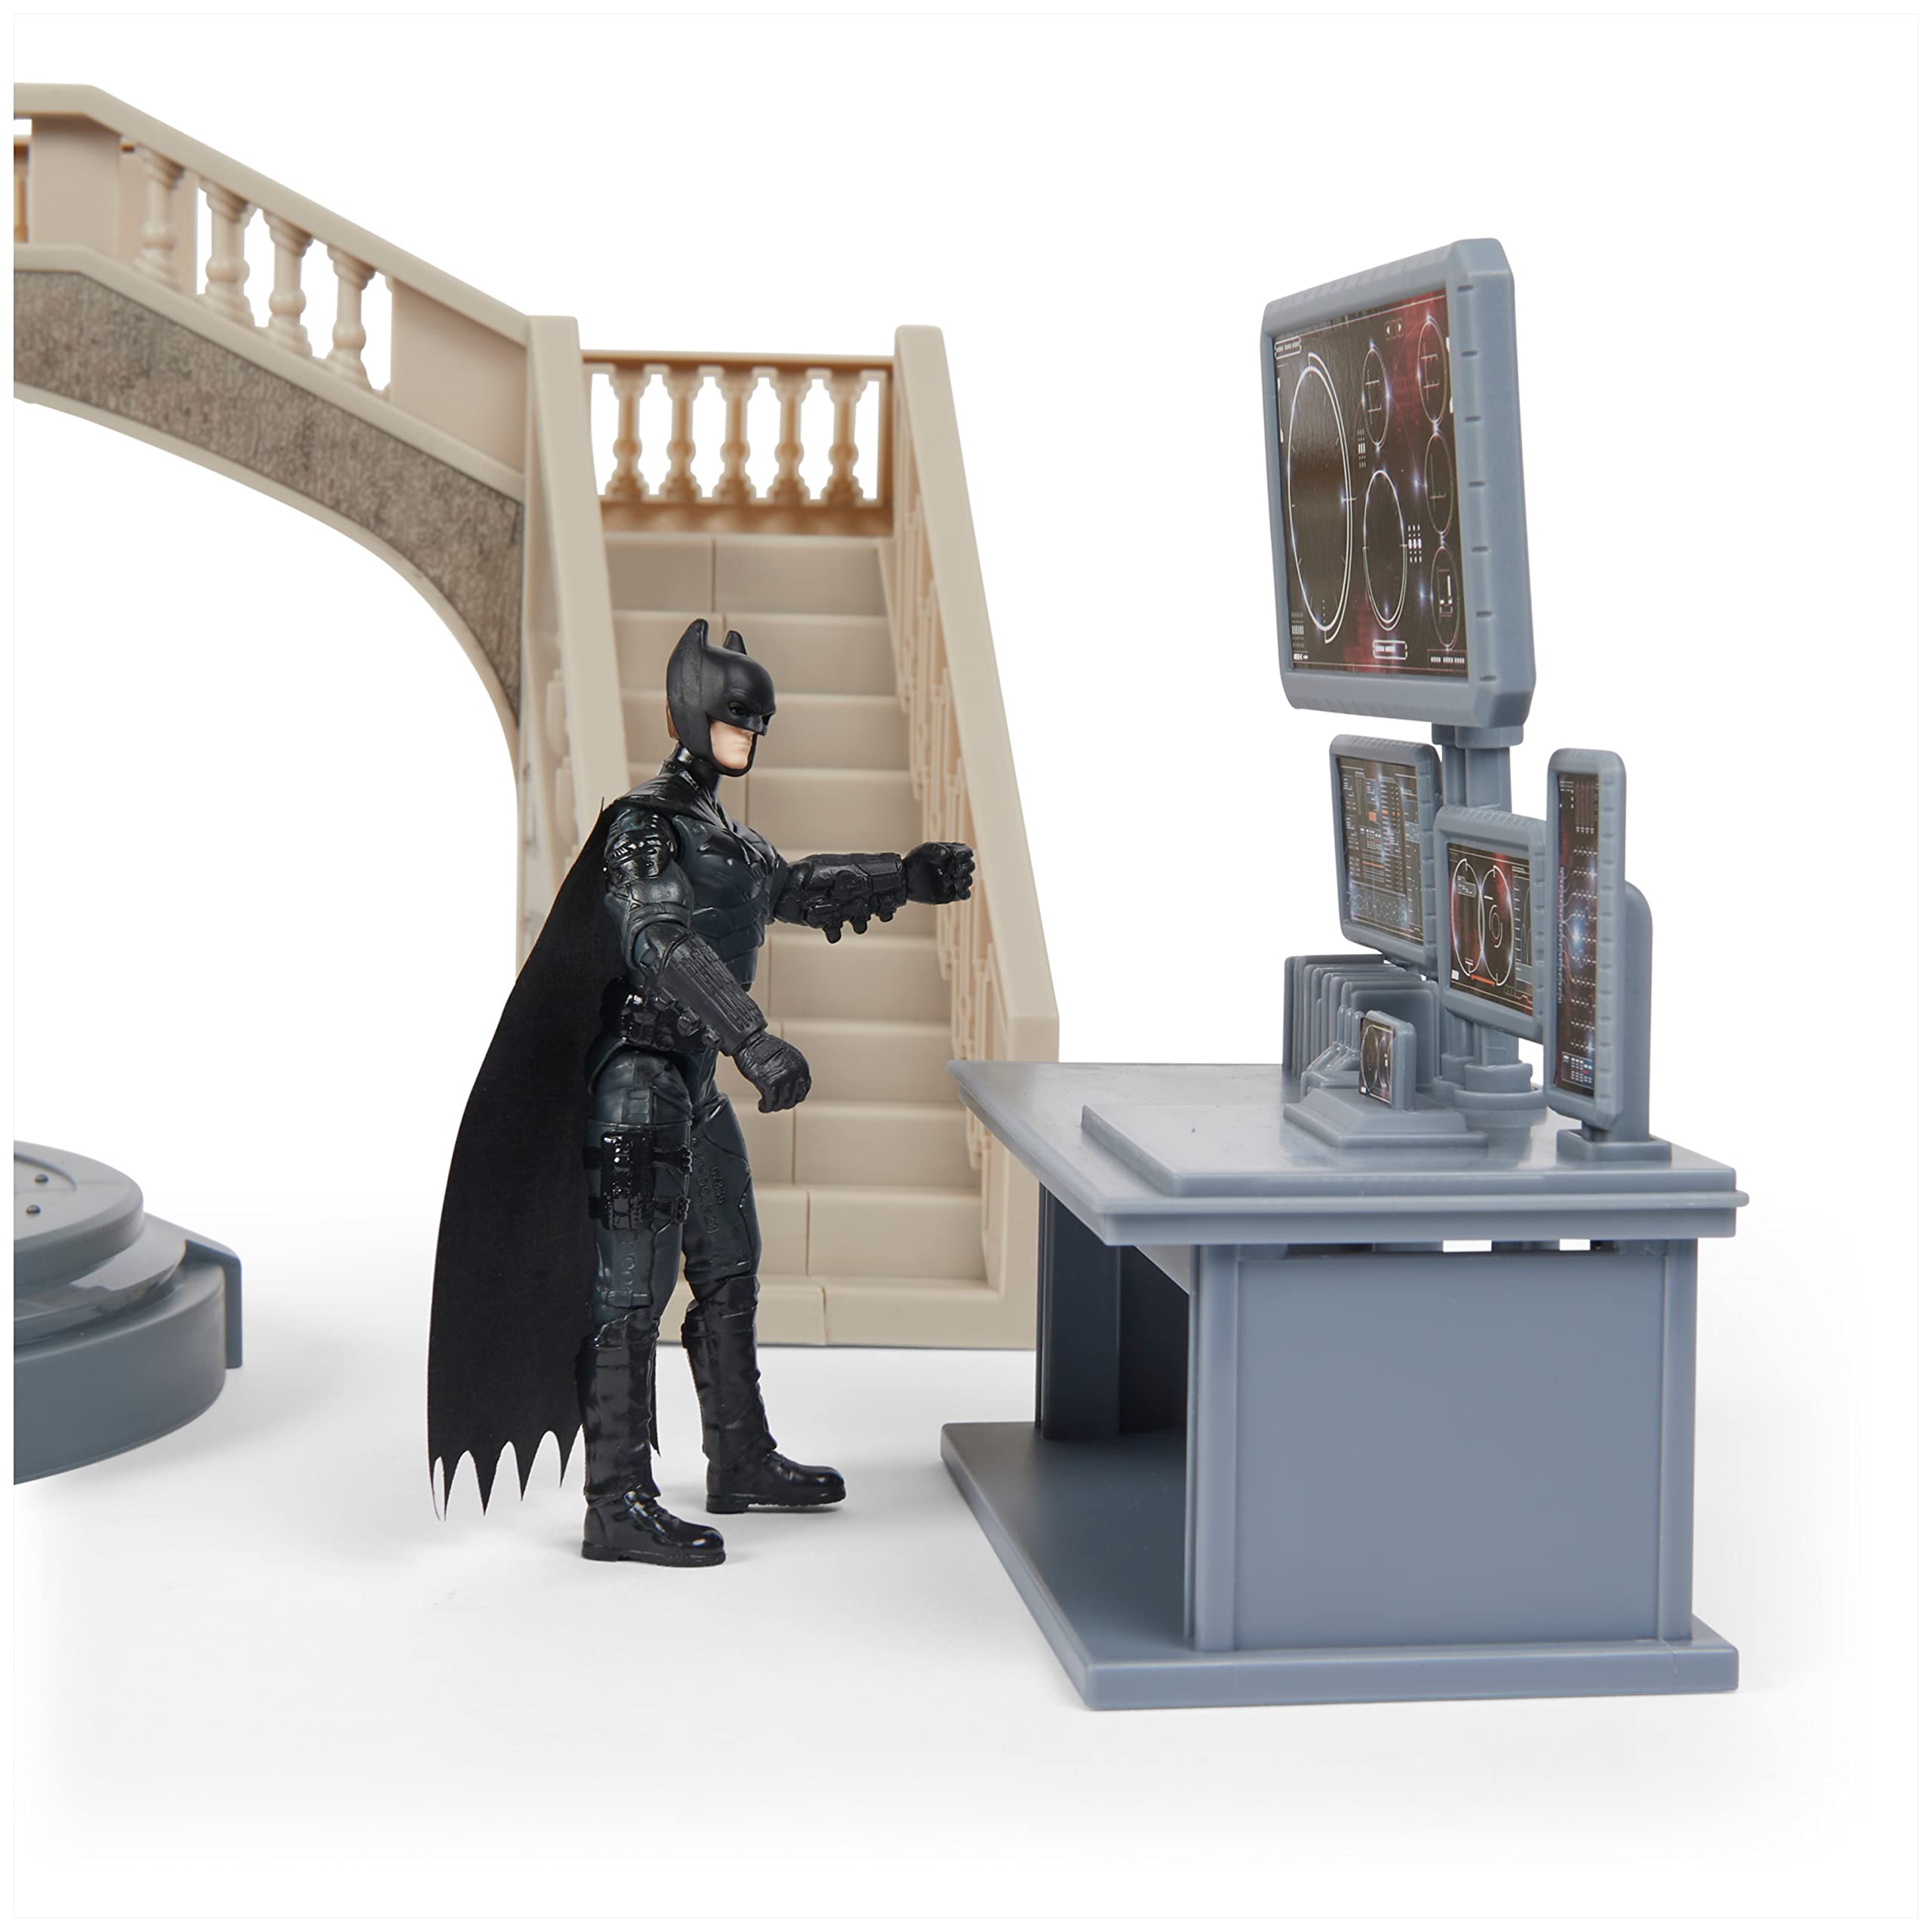 DC Comics, Batman Batcave with Exclusive Batman and Penguin Action Figures and Batcycle, The Batman Movie Collectible Kids Toys for Boys Ages 3 and Up